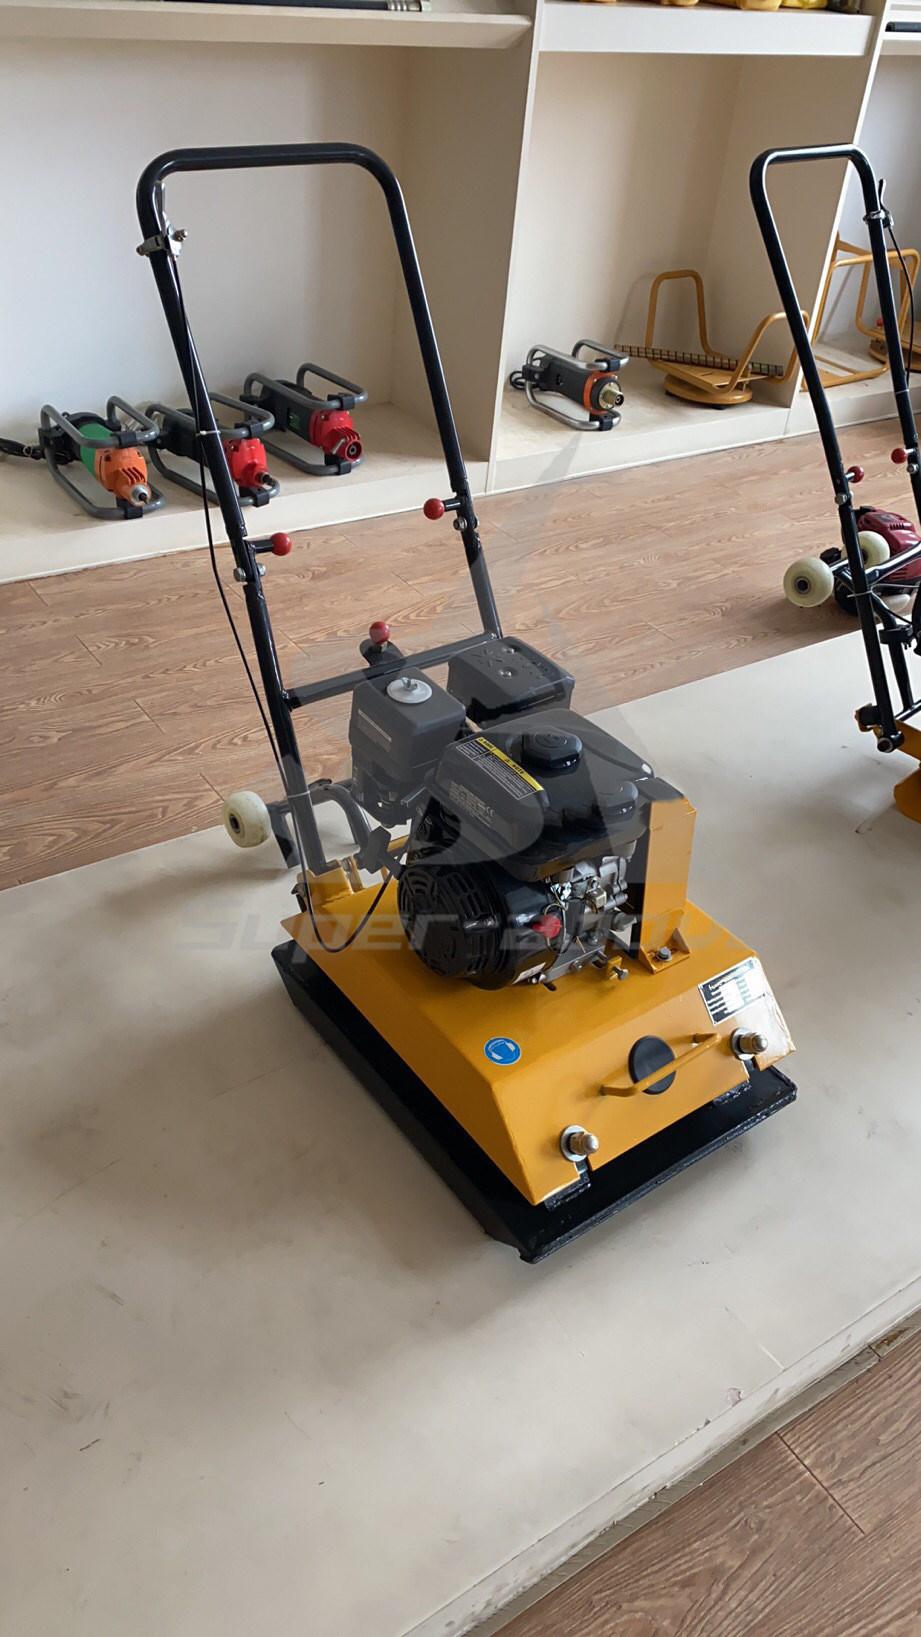 Vibrating Plate Compactor Small Hydraulic Machine Prices